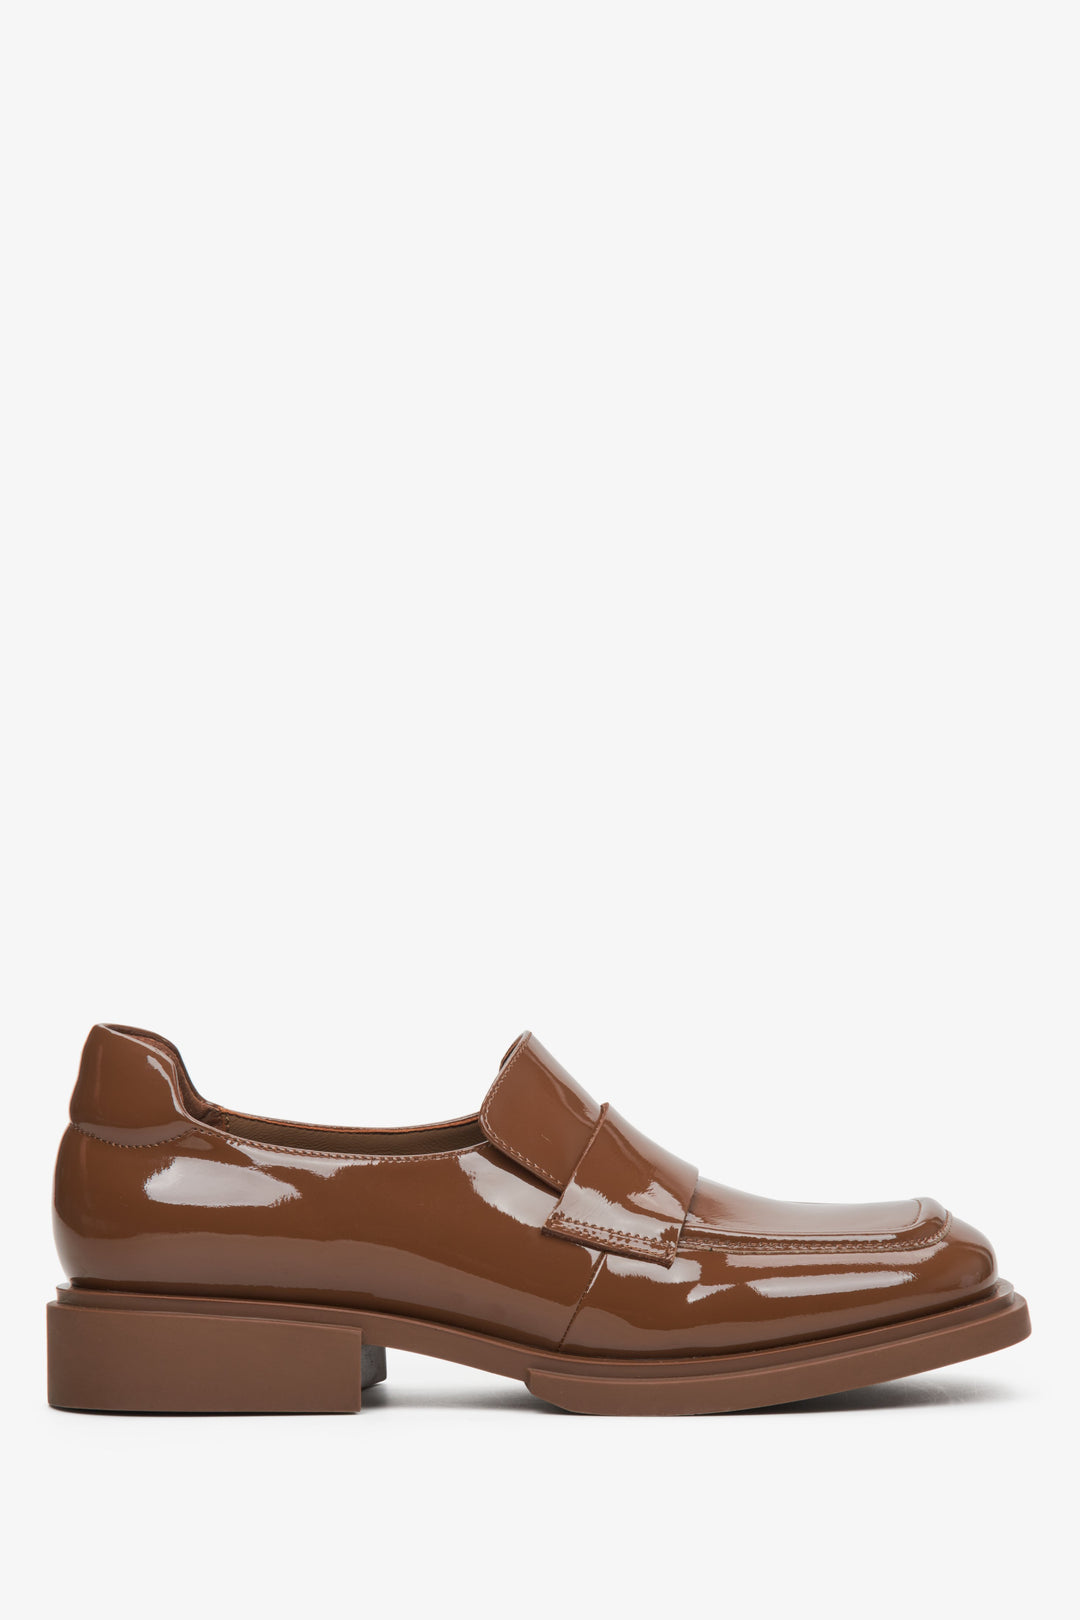 Women's Brown Moccasins made of Patent Genuine Leather Estro ER00113573.